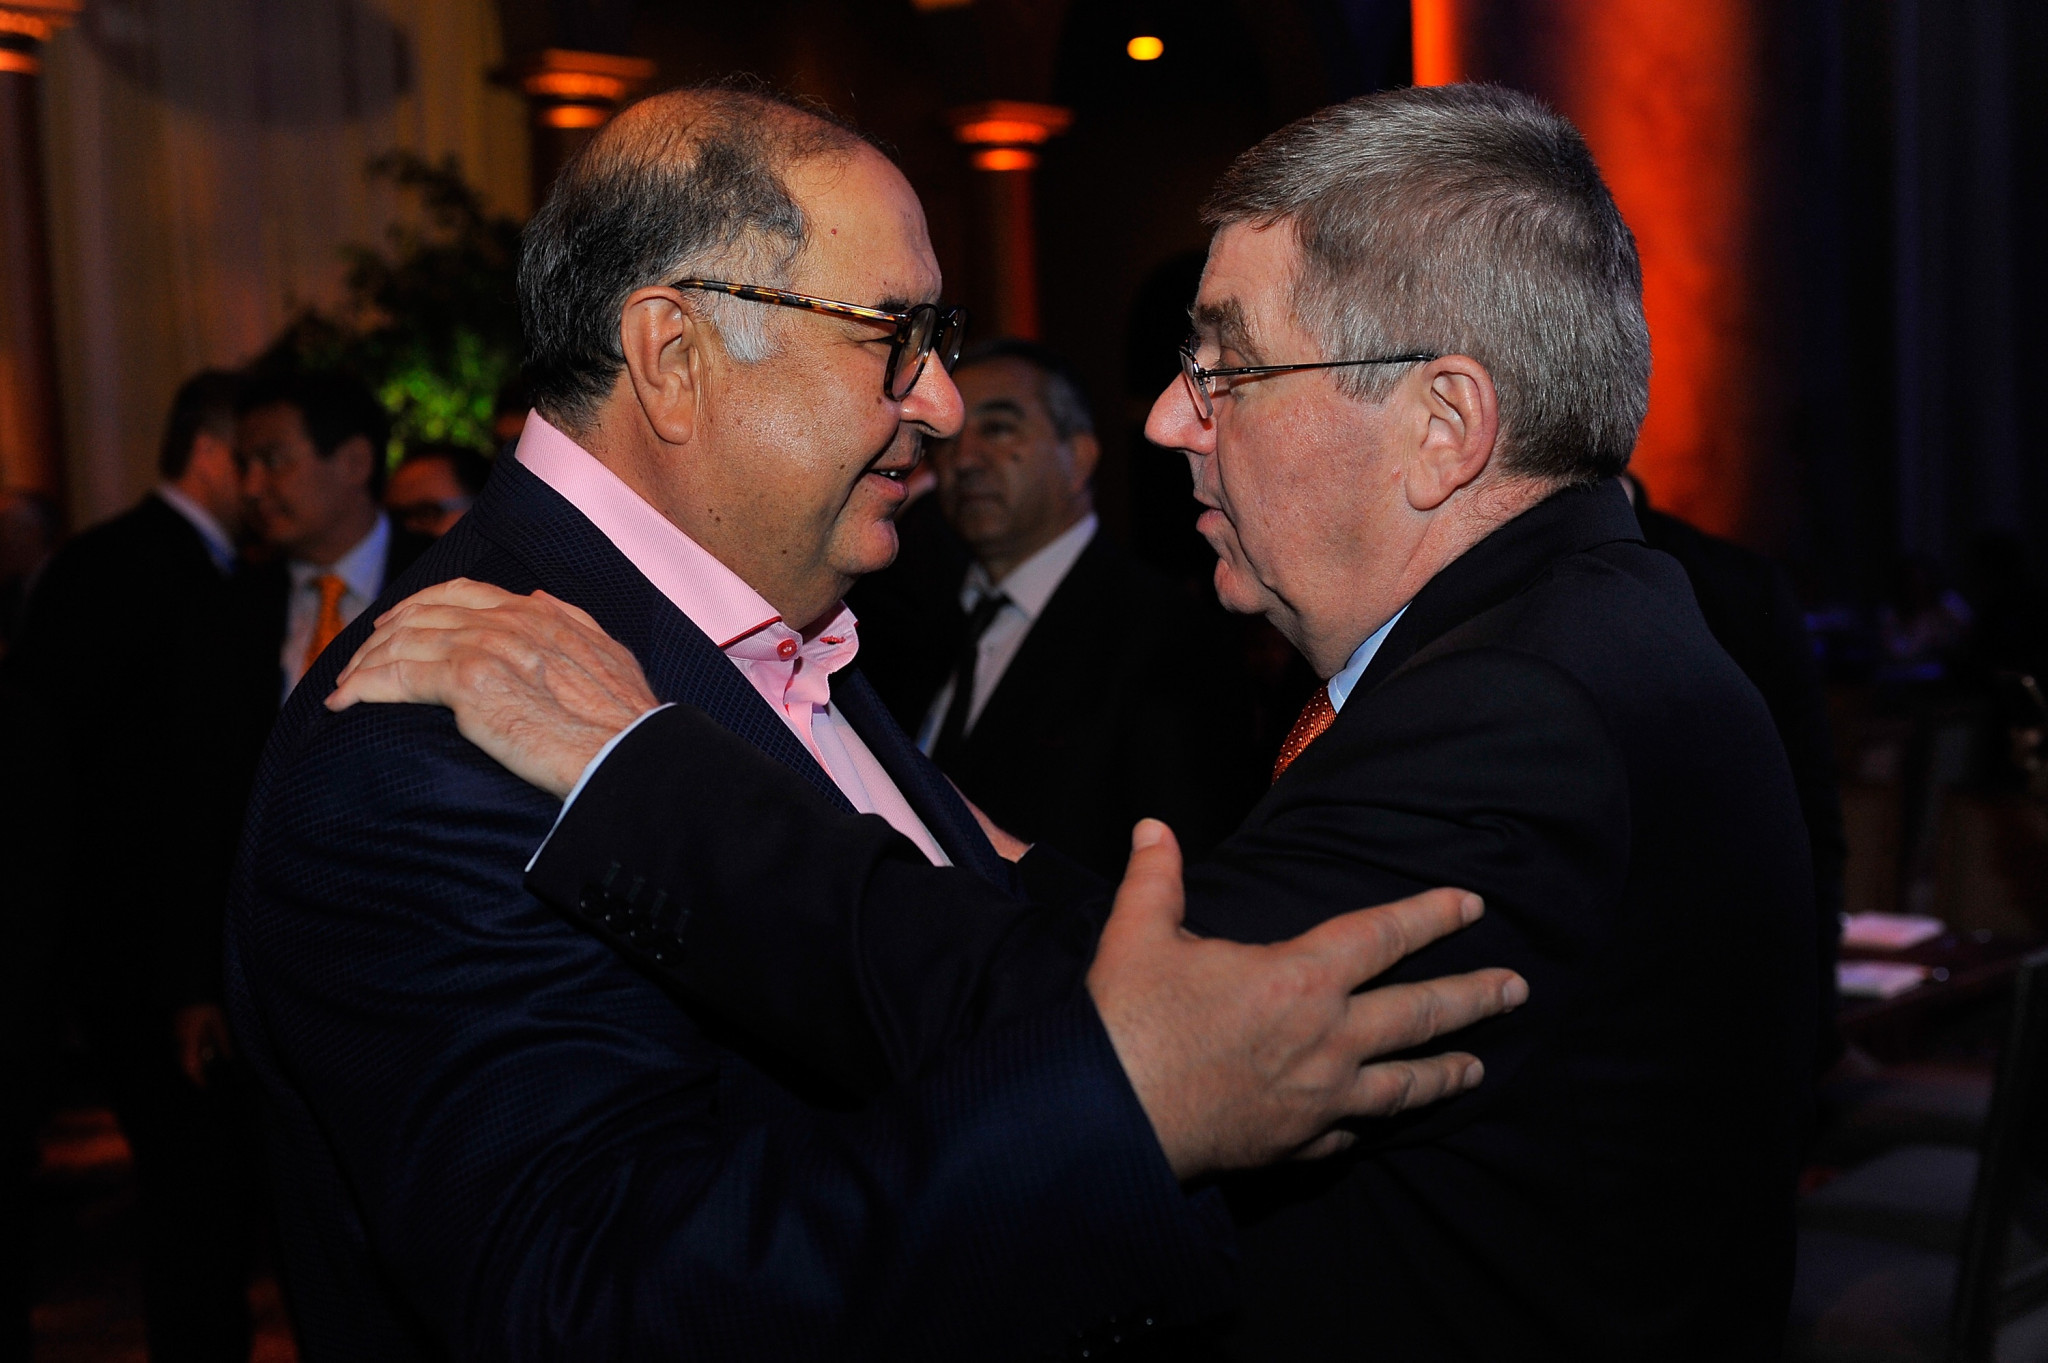 Alisher Usmanov, left, has donated CHF90 million towards FIE's finances since 2008 ©Getty Images